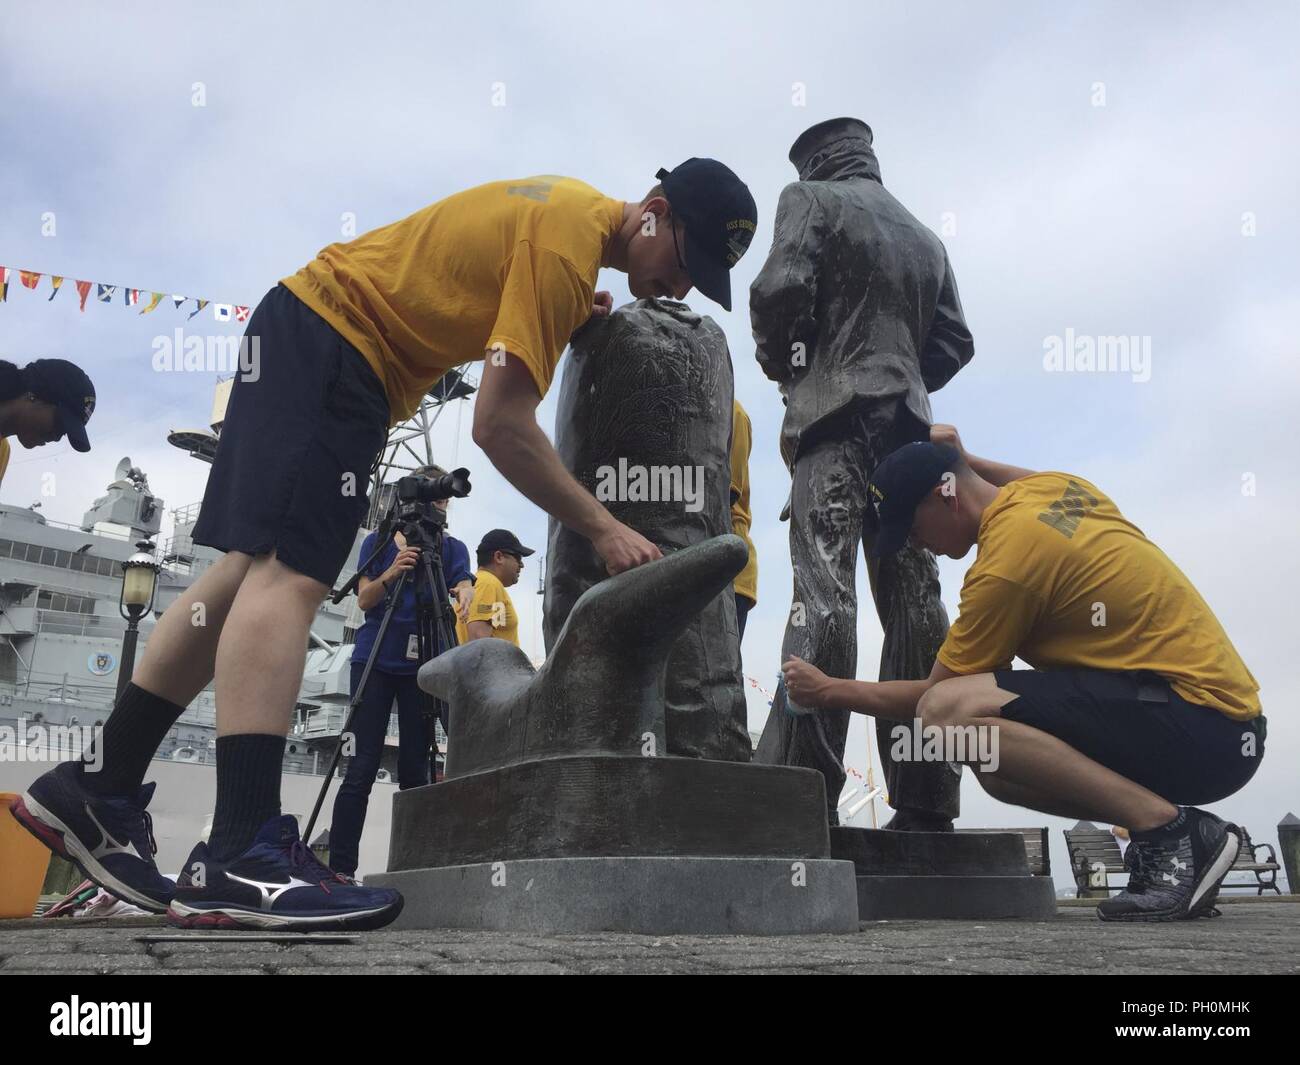 NORFOLK, Virginia (June 18, 2018) Sailors assigned to the aircraft carrier USS George H.W. Bush (CVN 77) clean the “Lone Sailor” statue at Norfolk’s Town Point Park. As a birthday tribute to the ship’s namesake, and representing his famous “Thousand Points of Light” speech, approximately 1,000 GHWB crew members took part in one of the largest single-day community relation (COMREL) events at 44 different locations throughout the Hampton Roads area. George H.W. Bush turned 94 on June 12. Stock Photo